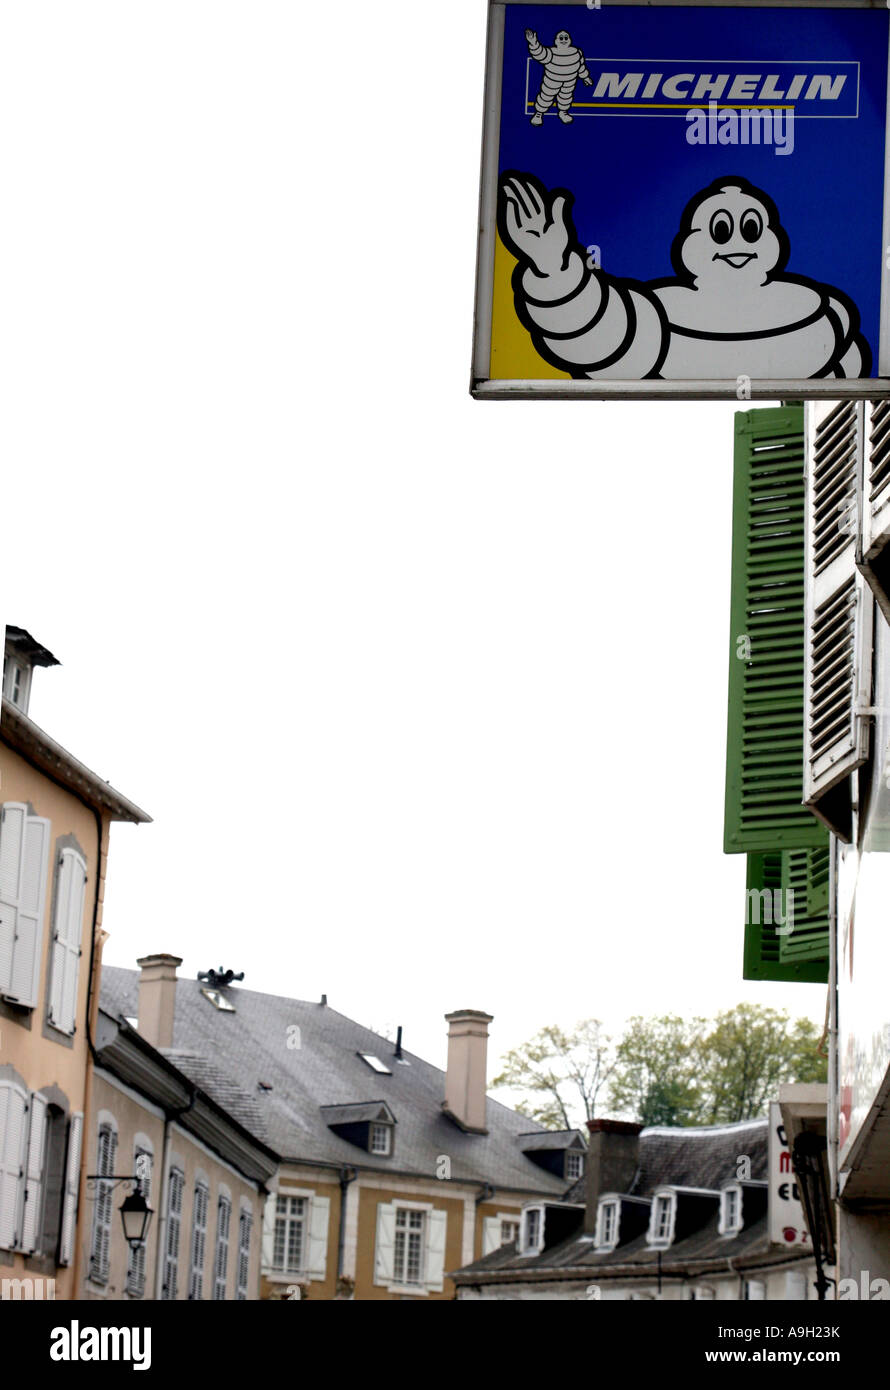 Iconic Michelin sign in small French town 2007 Stock Photo